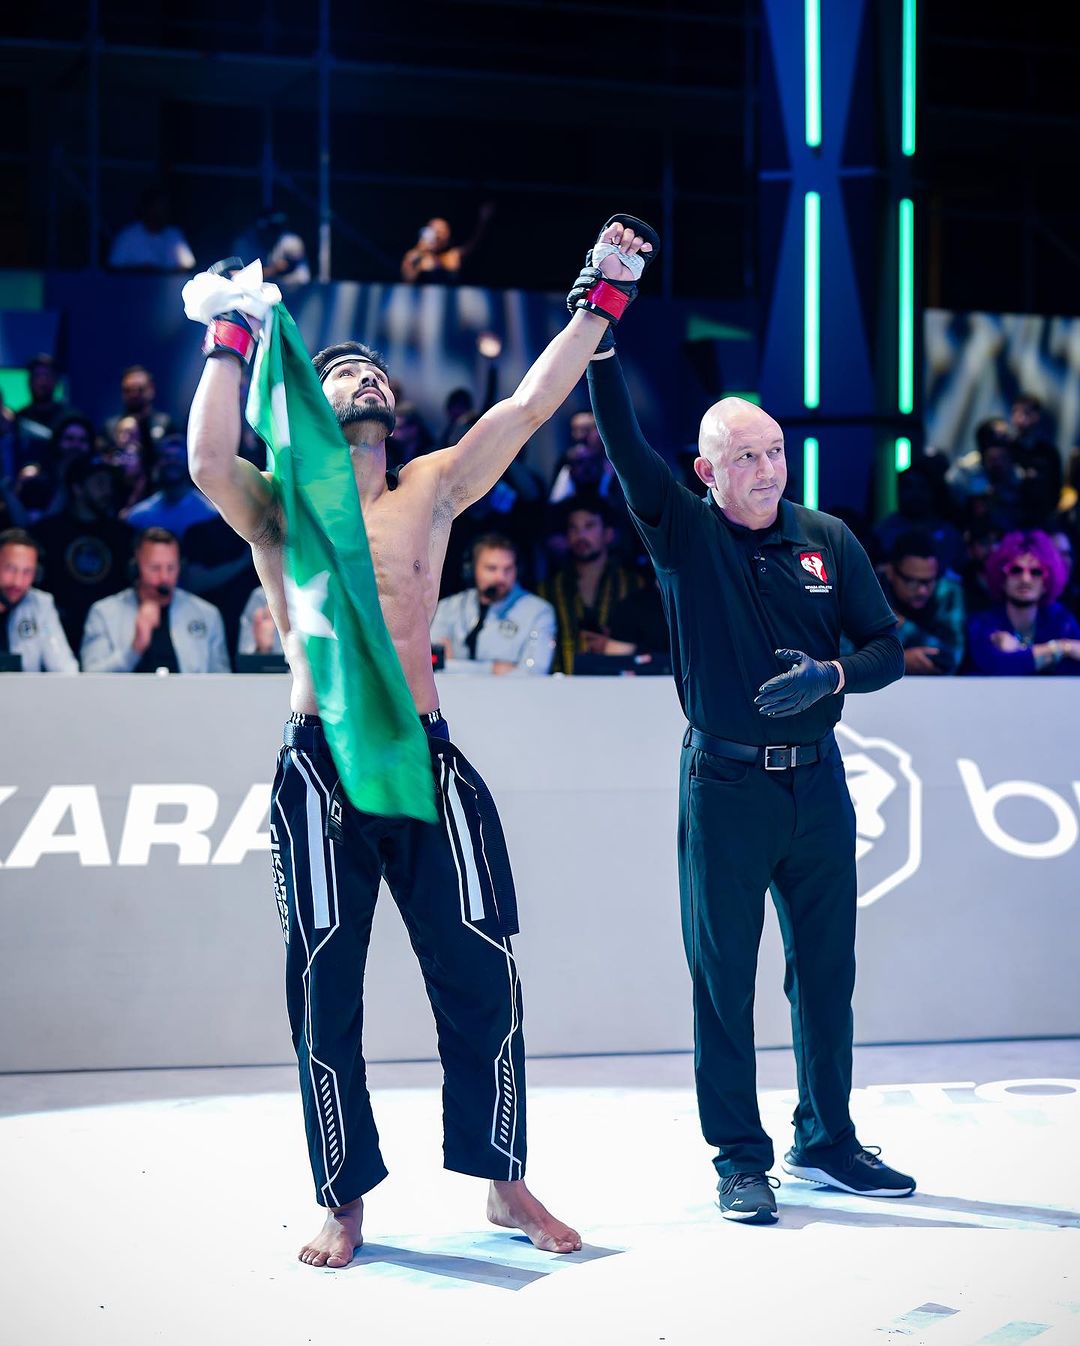 Goat Worldwide’s Shahzaib Rindh and Loxbey Montalvan Emerged as Victors at Karate Combat 43